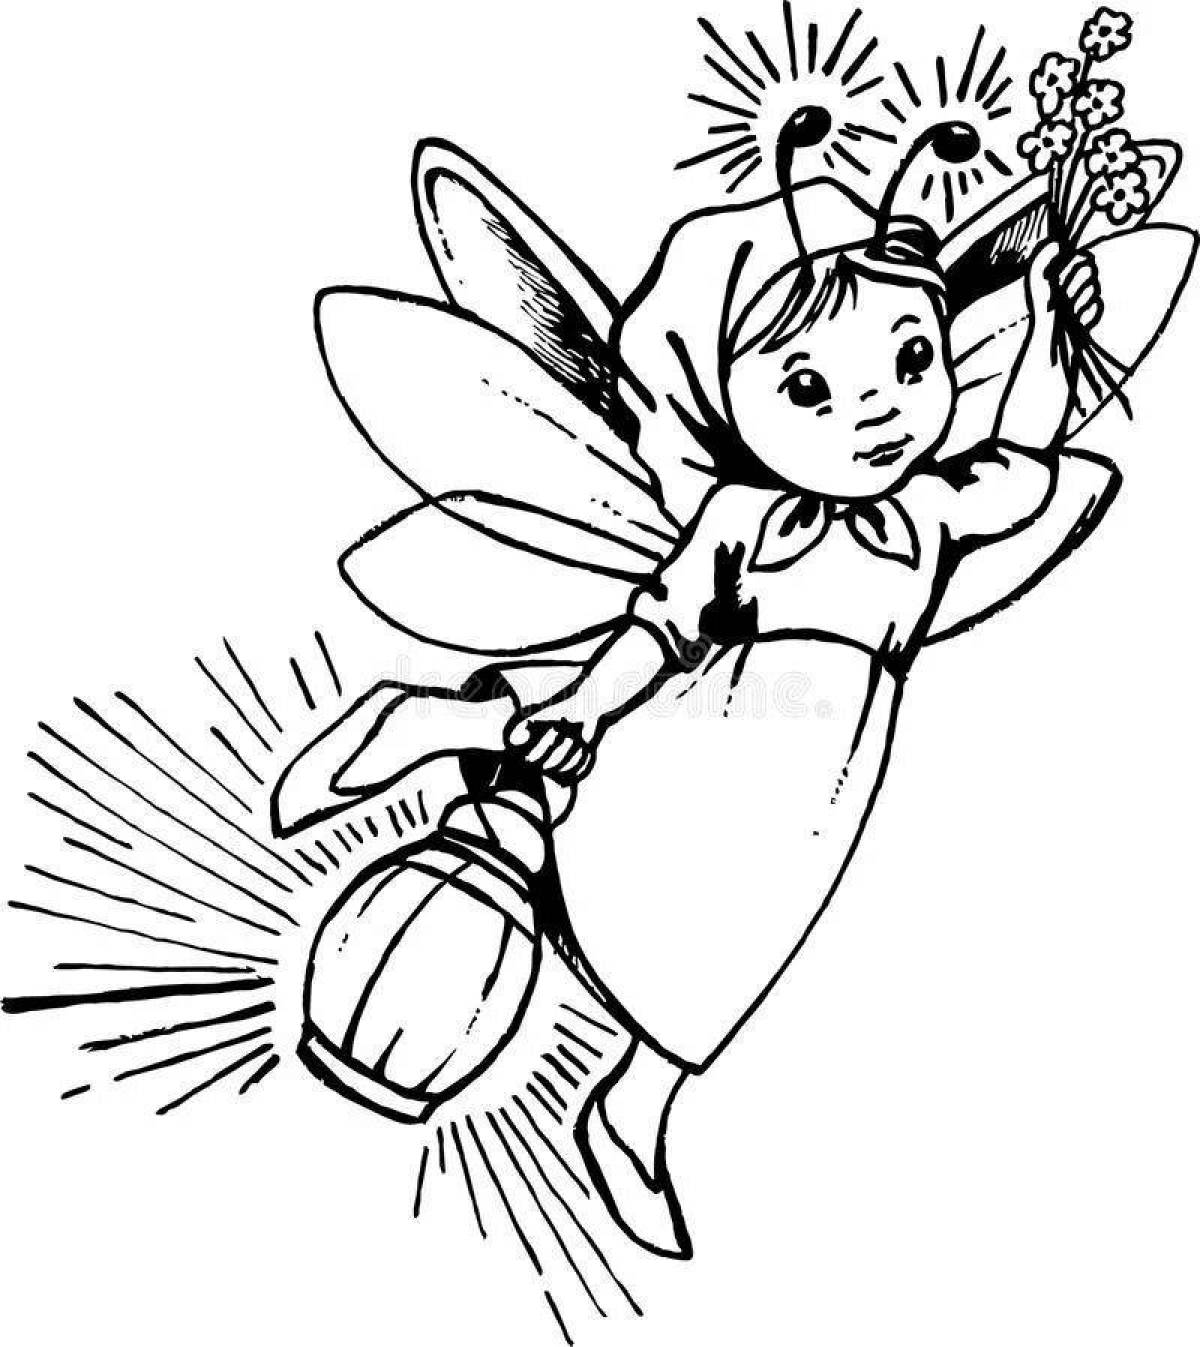 Coloring page happy firefly